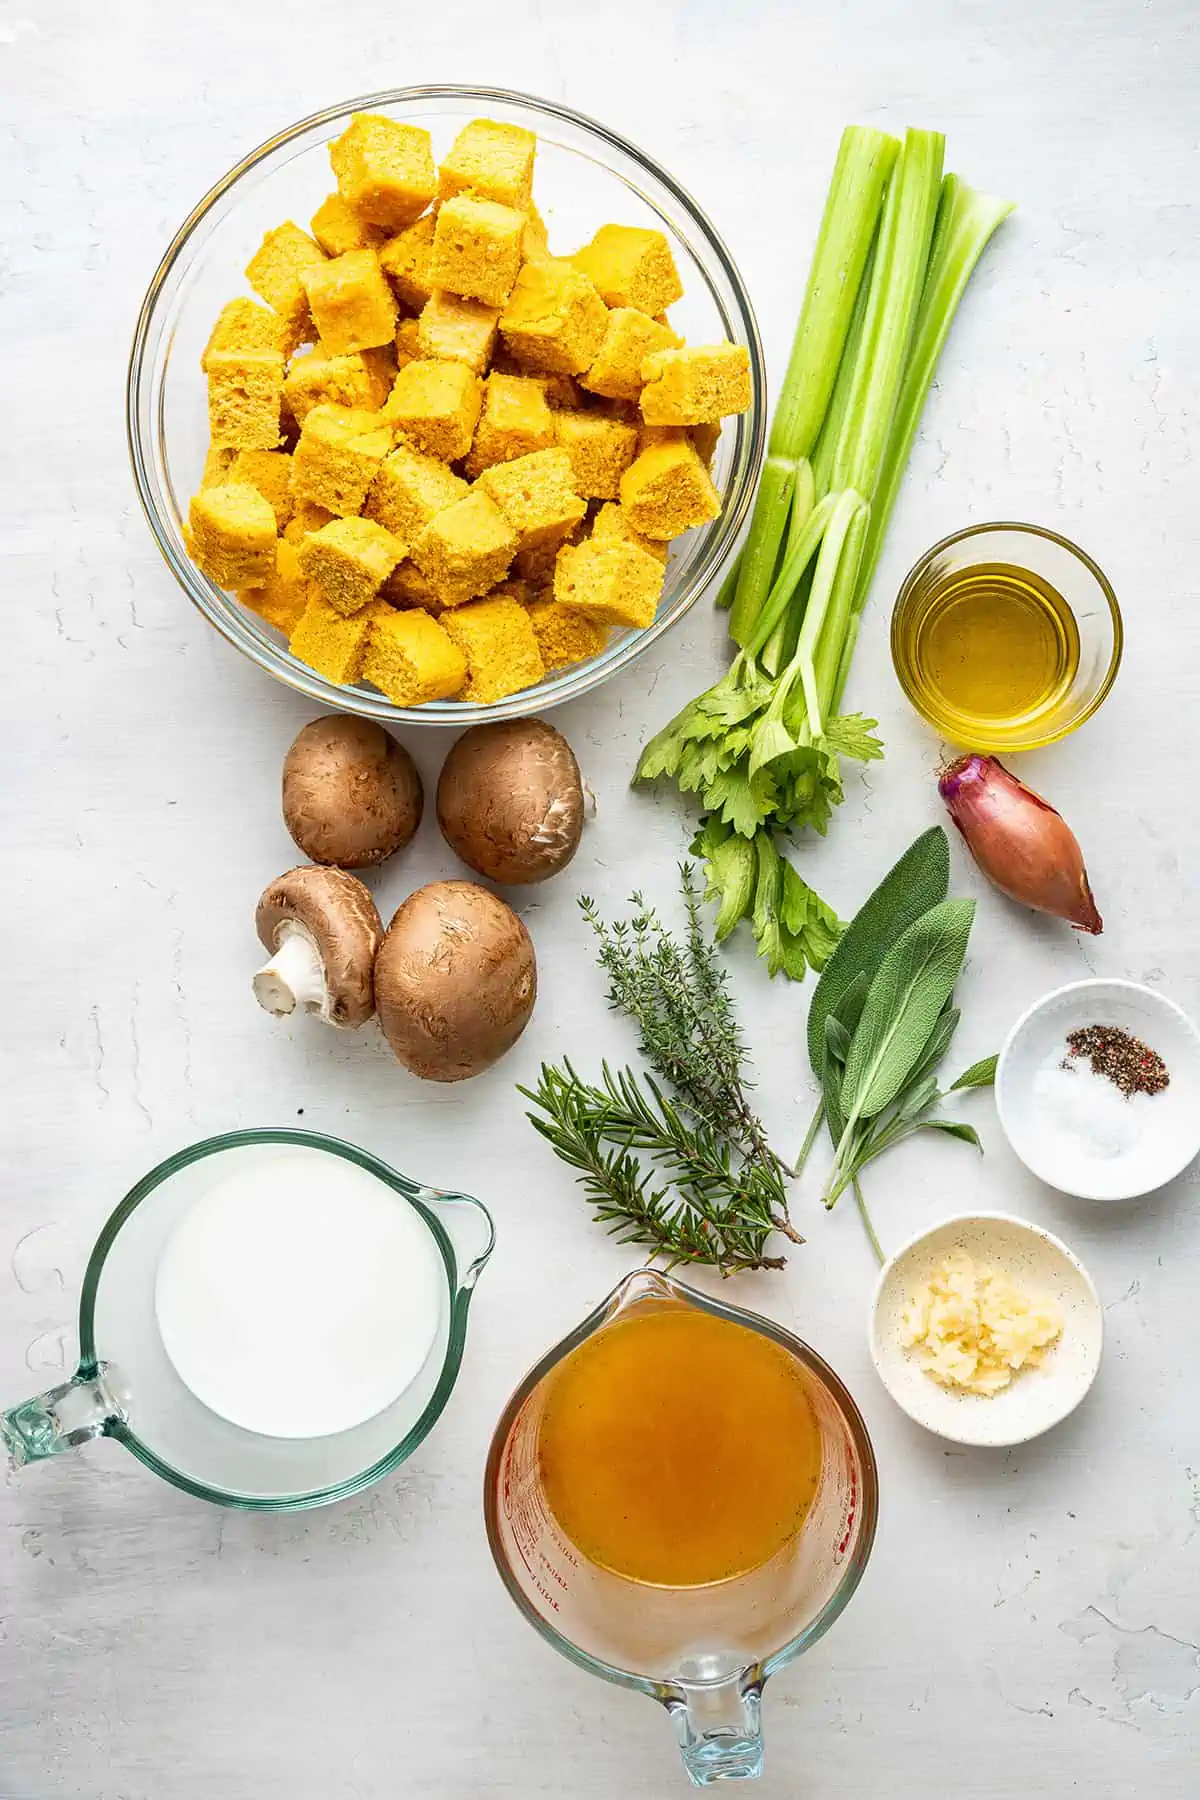 The ingredients for vegan cornbread stuffing: a bowl of cornbread squares, stalks of celery, whole mushrooms, a whole shallot, a bowl of olive oil, a bowl of vegetable broth, a bowl of almond milk, a bowl of salt and pepper, a bowl of minced garlic, and fresh thyme, rosemary, and sage